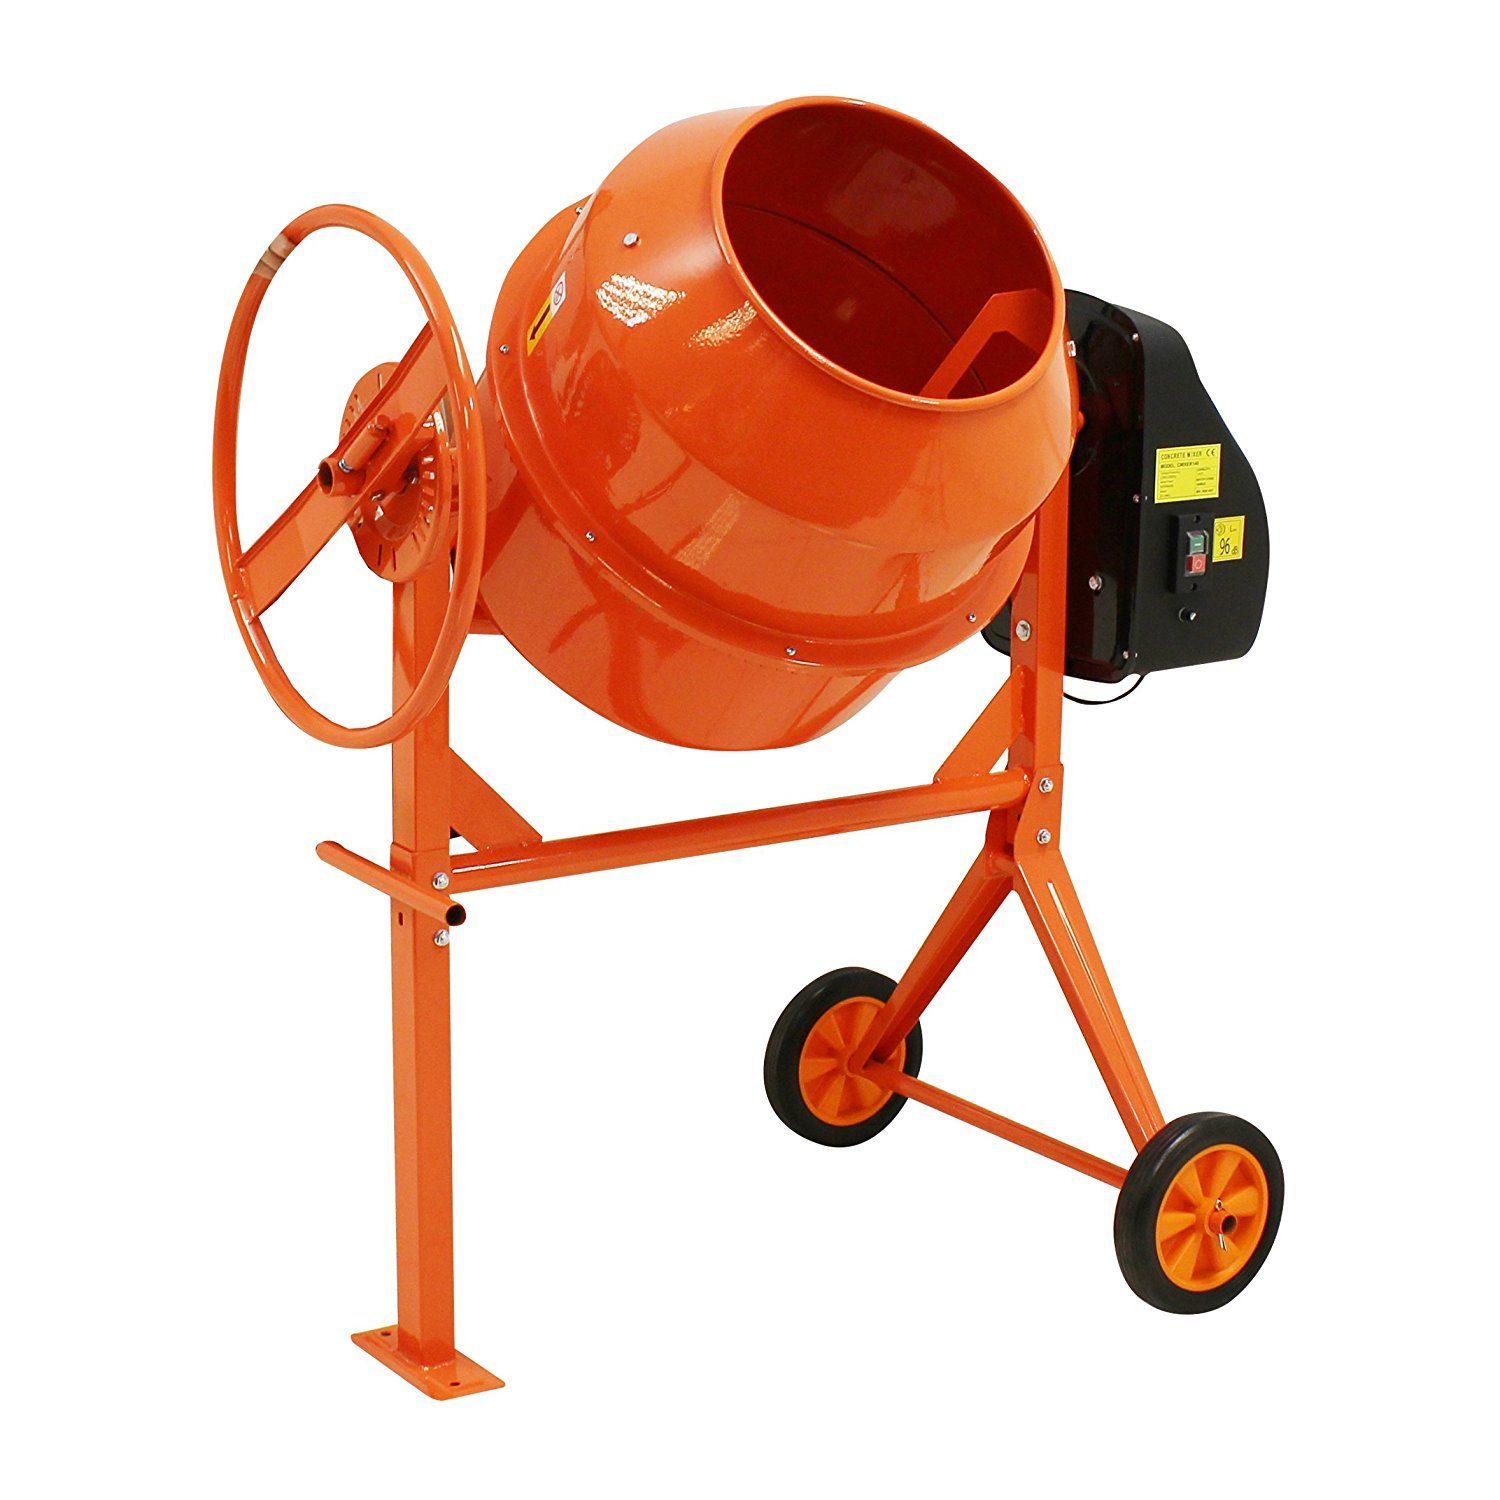 FoxHunter 650W Electric Cement Mixer UK Review